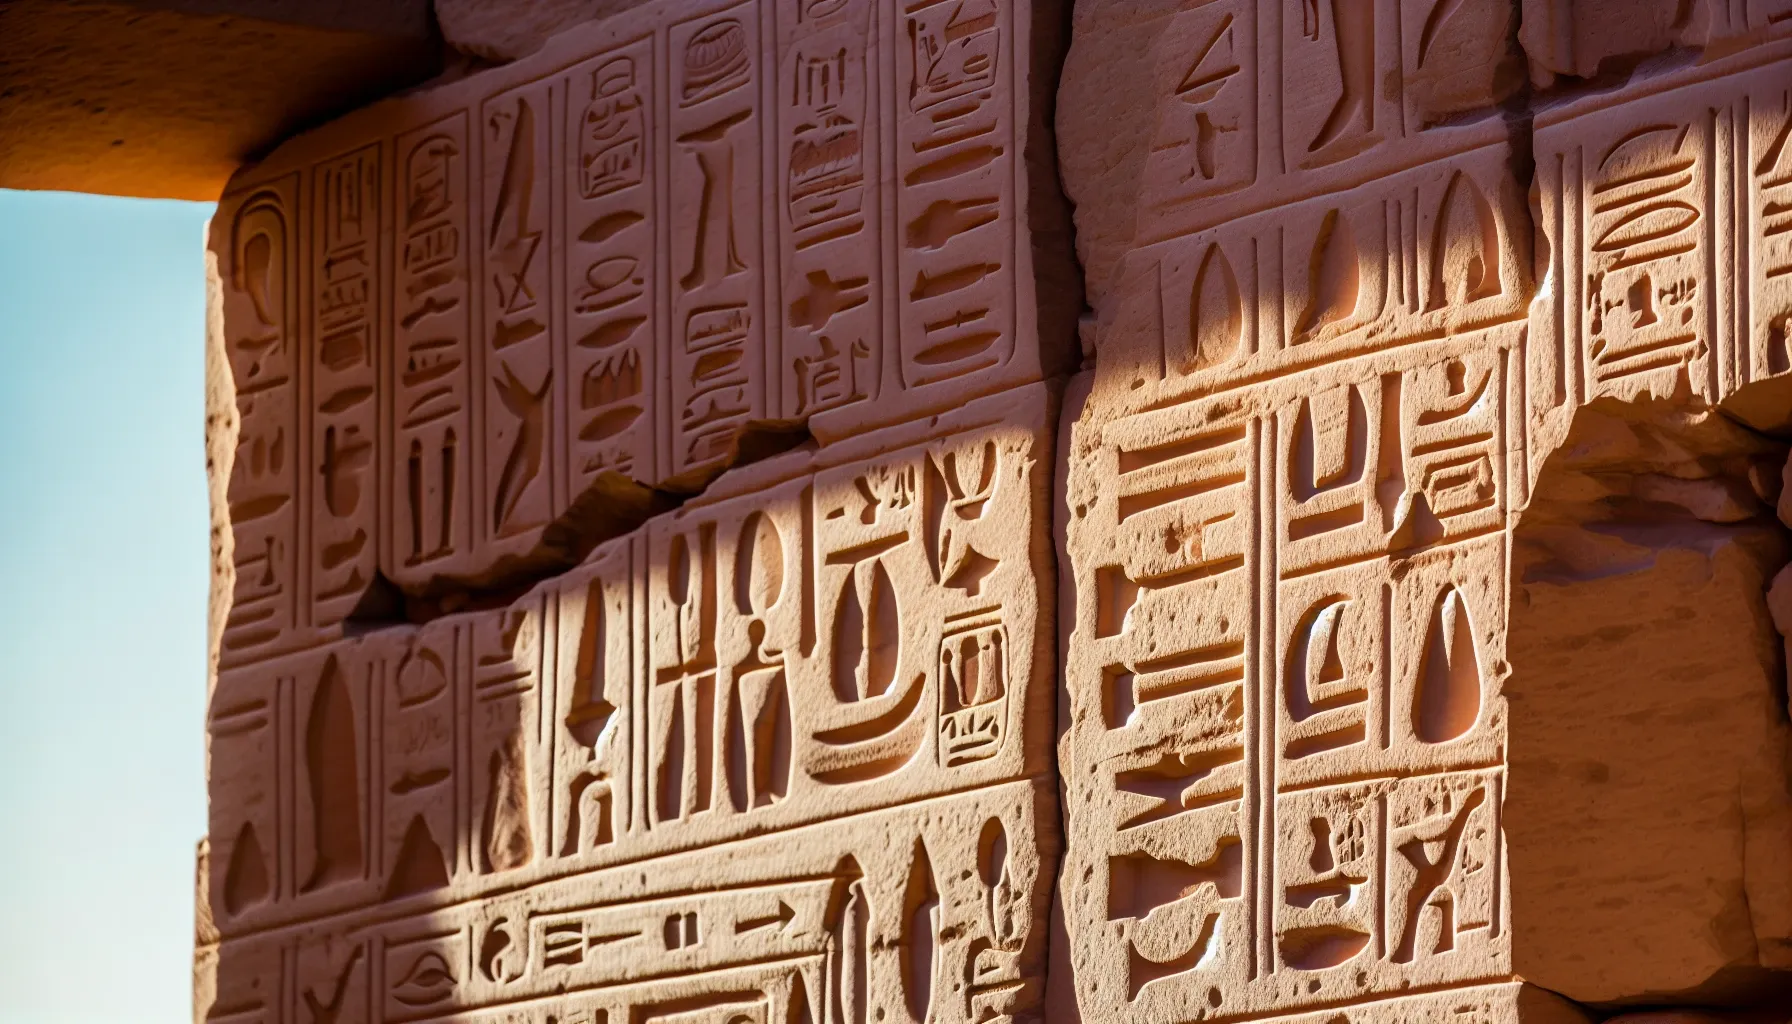 Abu Simbel temples' stone wall adorned with ancient Egyptian hieroglyphs.